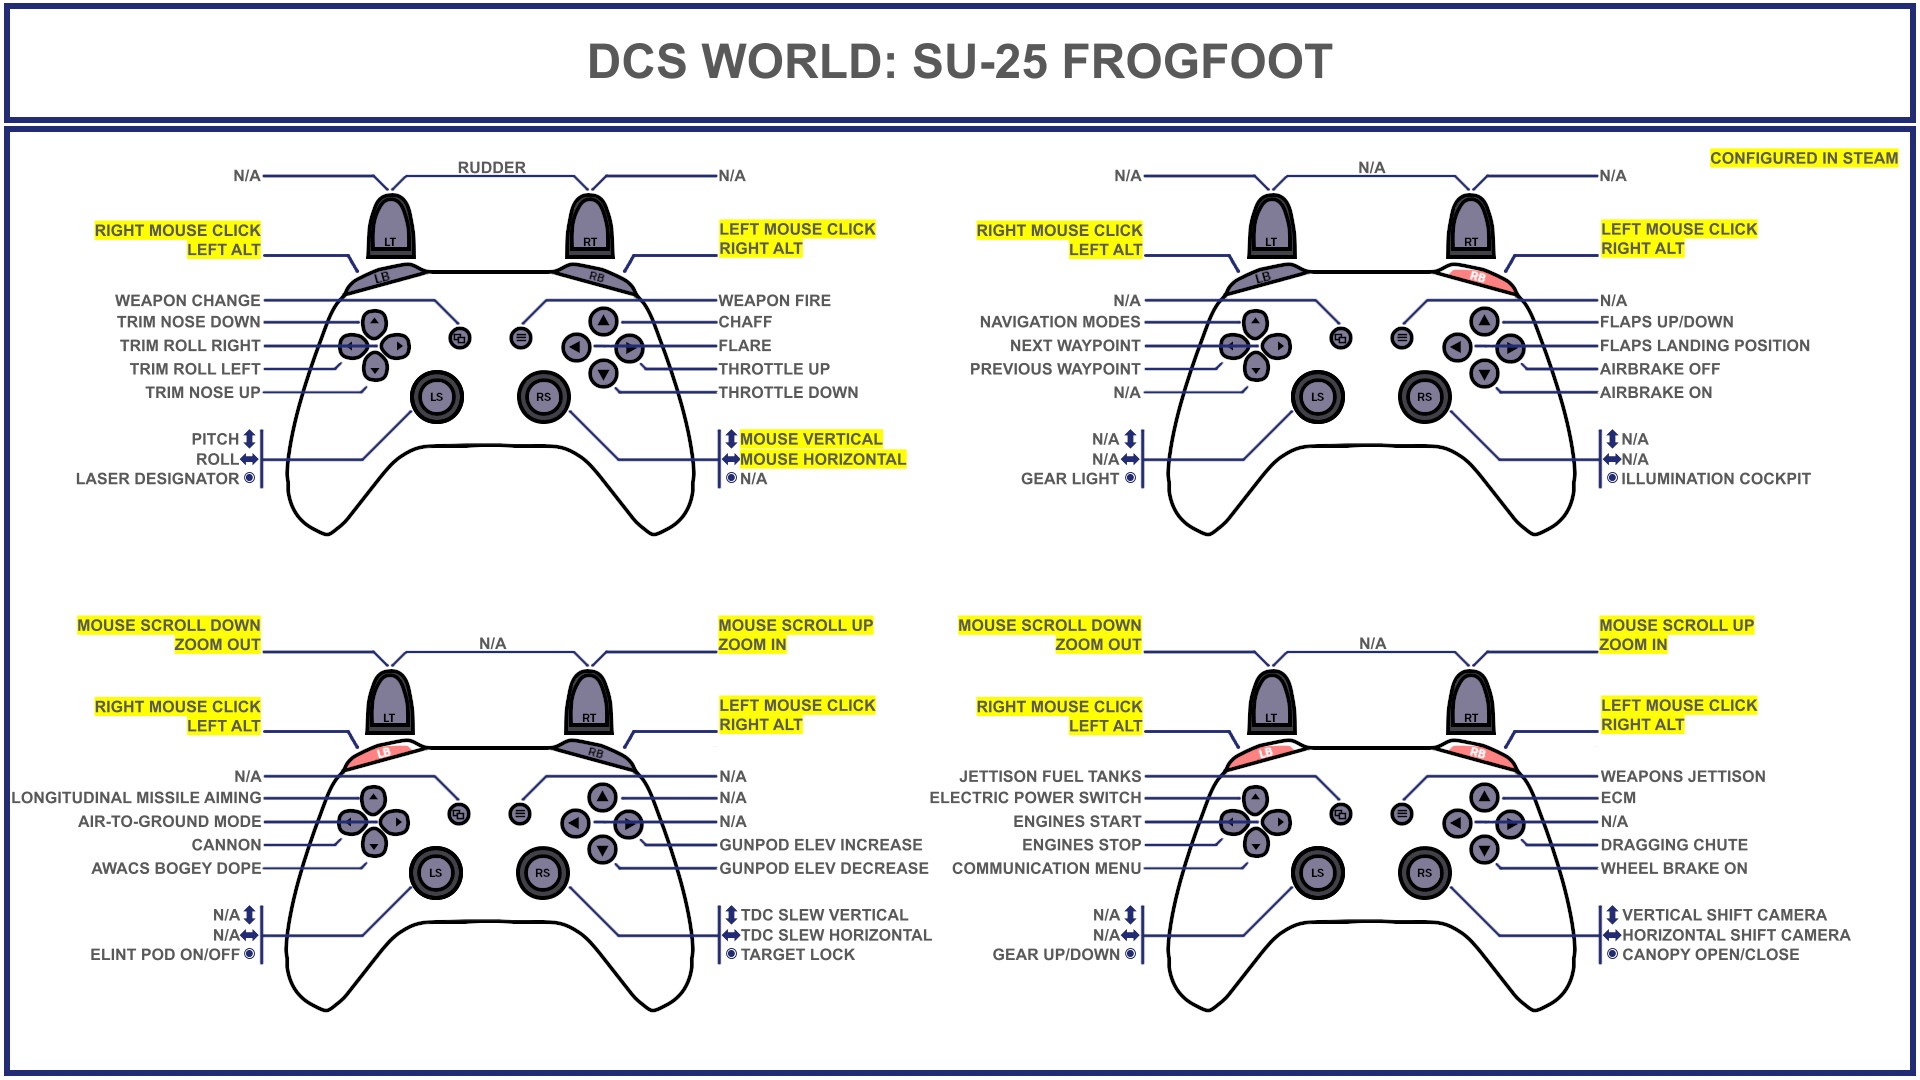 Tuuvas' Official Su-25 Frogfoot Gamepad Controller Layout